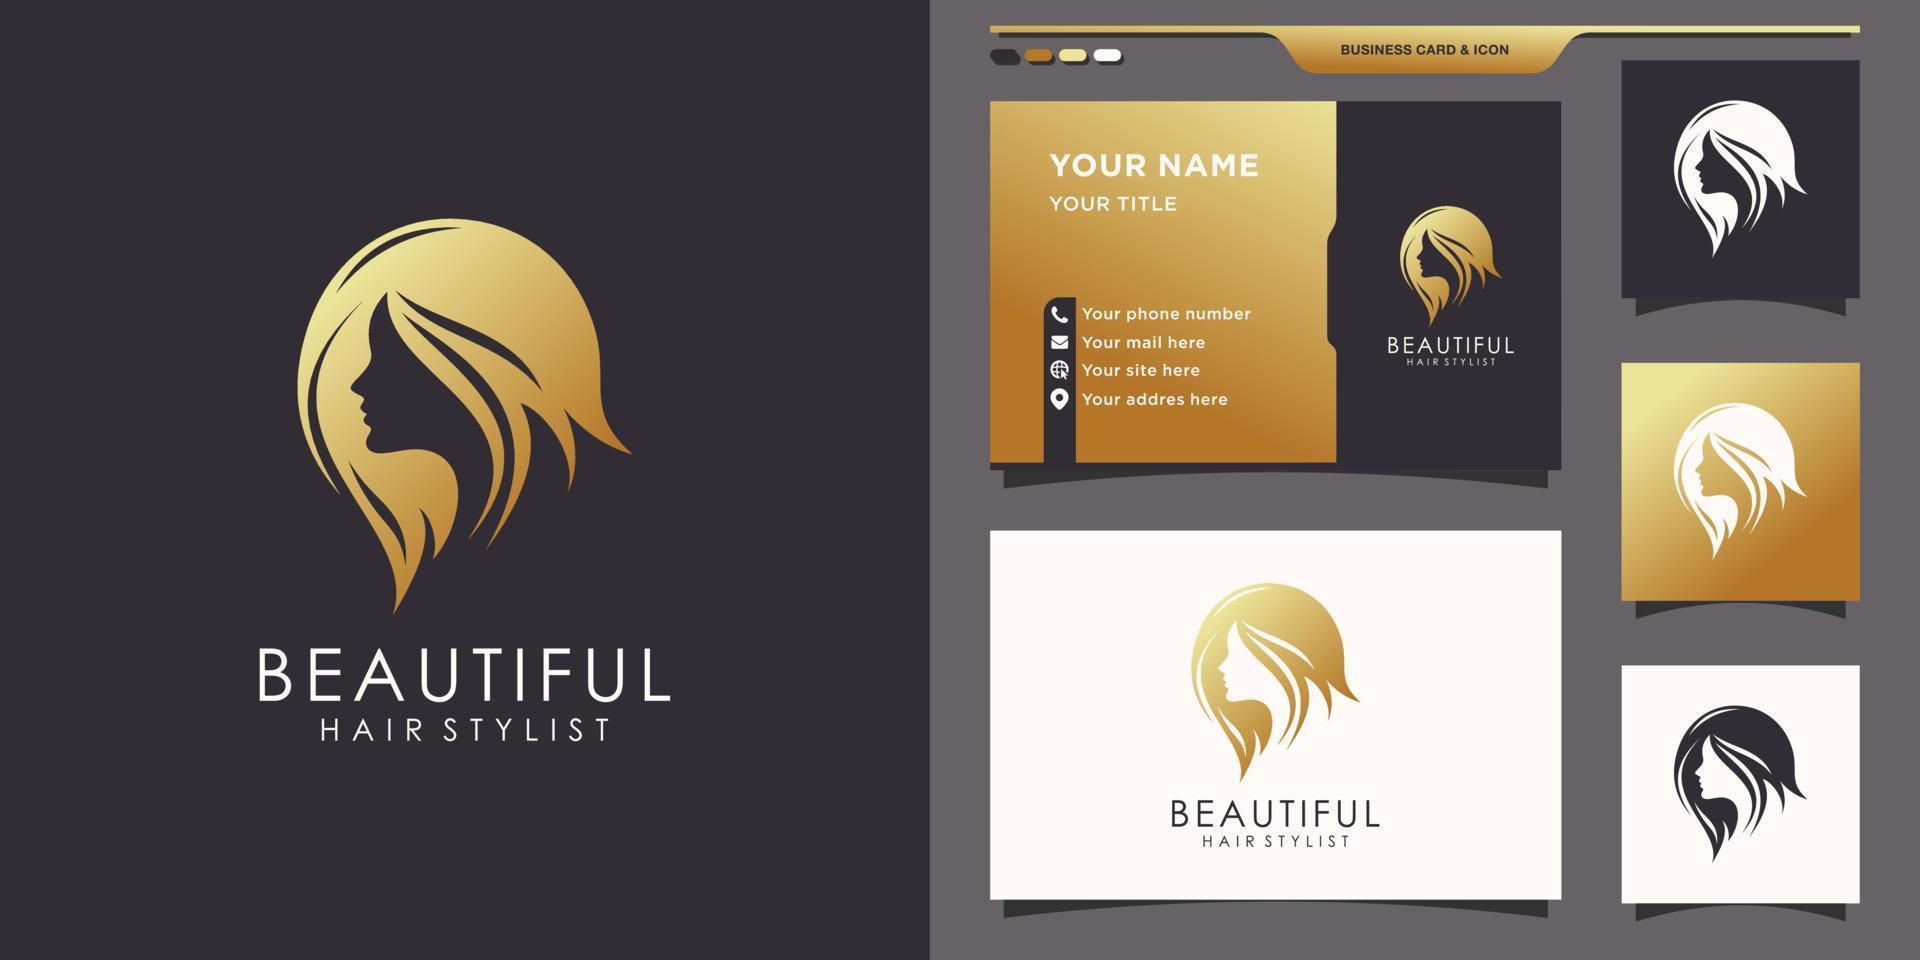 Elegant beautiful logo for woman with golden style and business card design. Logo can be used for beauty salon, hair stylist, hairdresser. Premium Vector